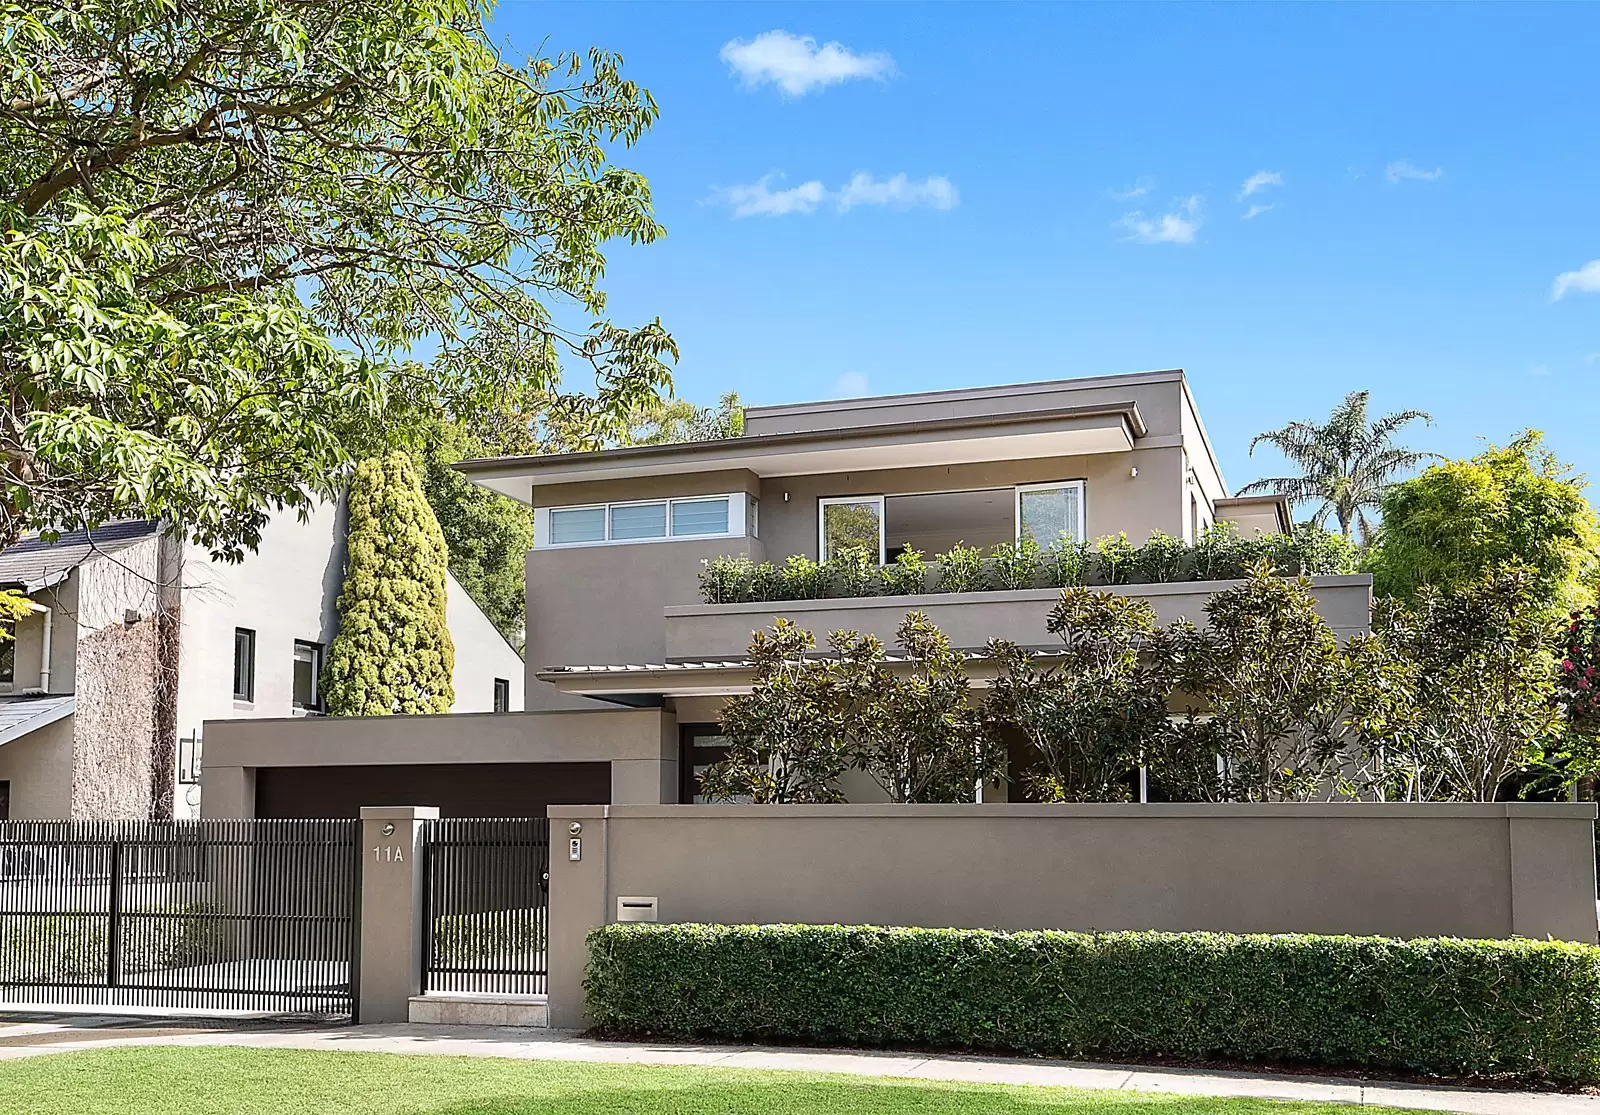 Photo #13: 11A Salisbury Road, Rose Bay - Sold by Sydney Sotheby's International Realty